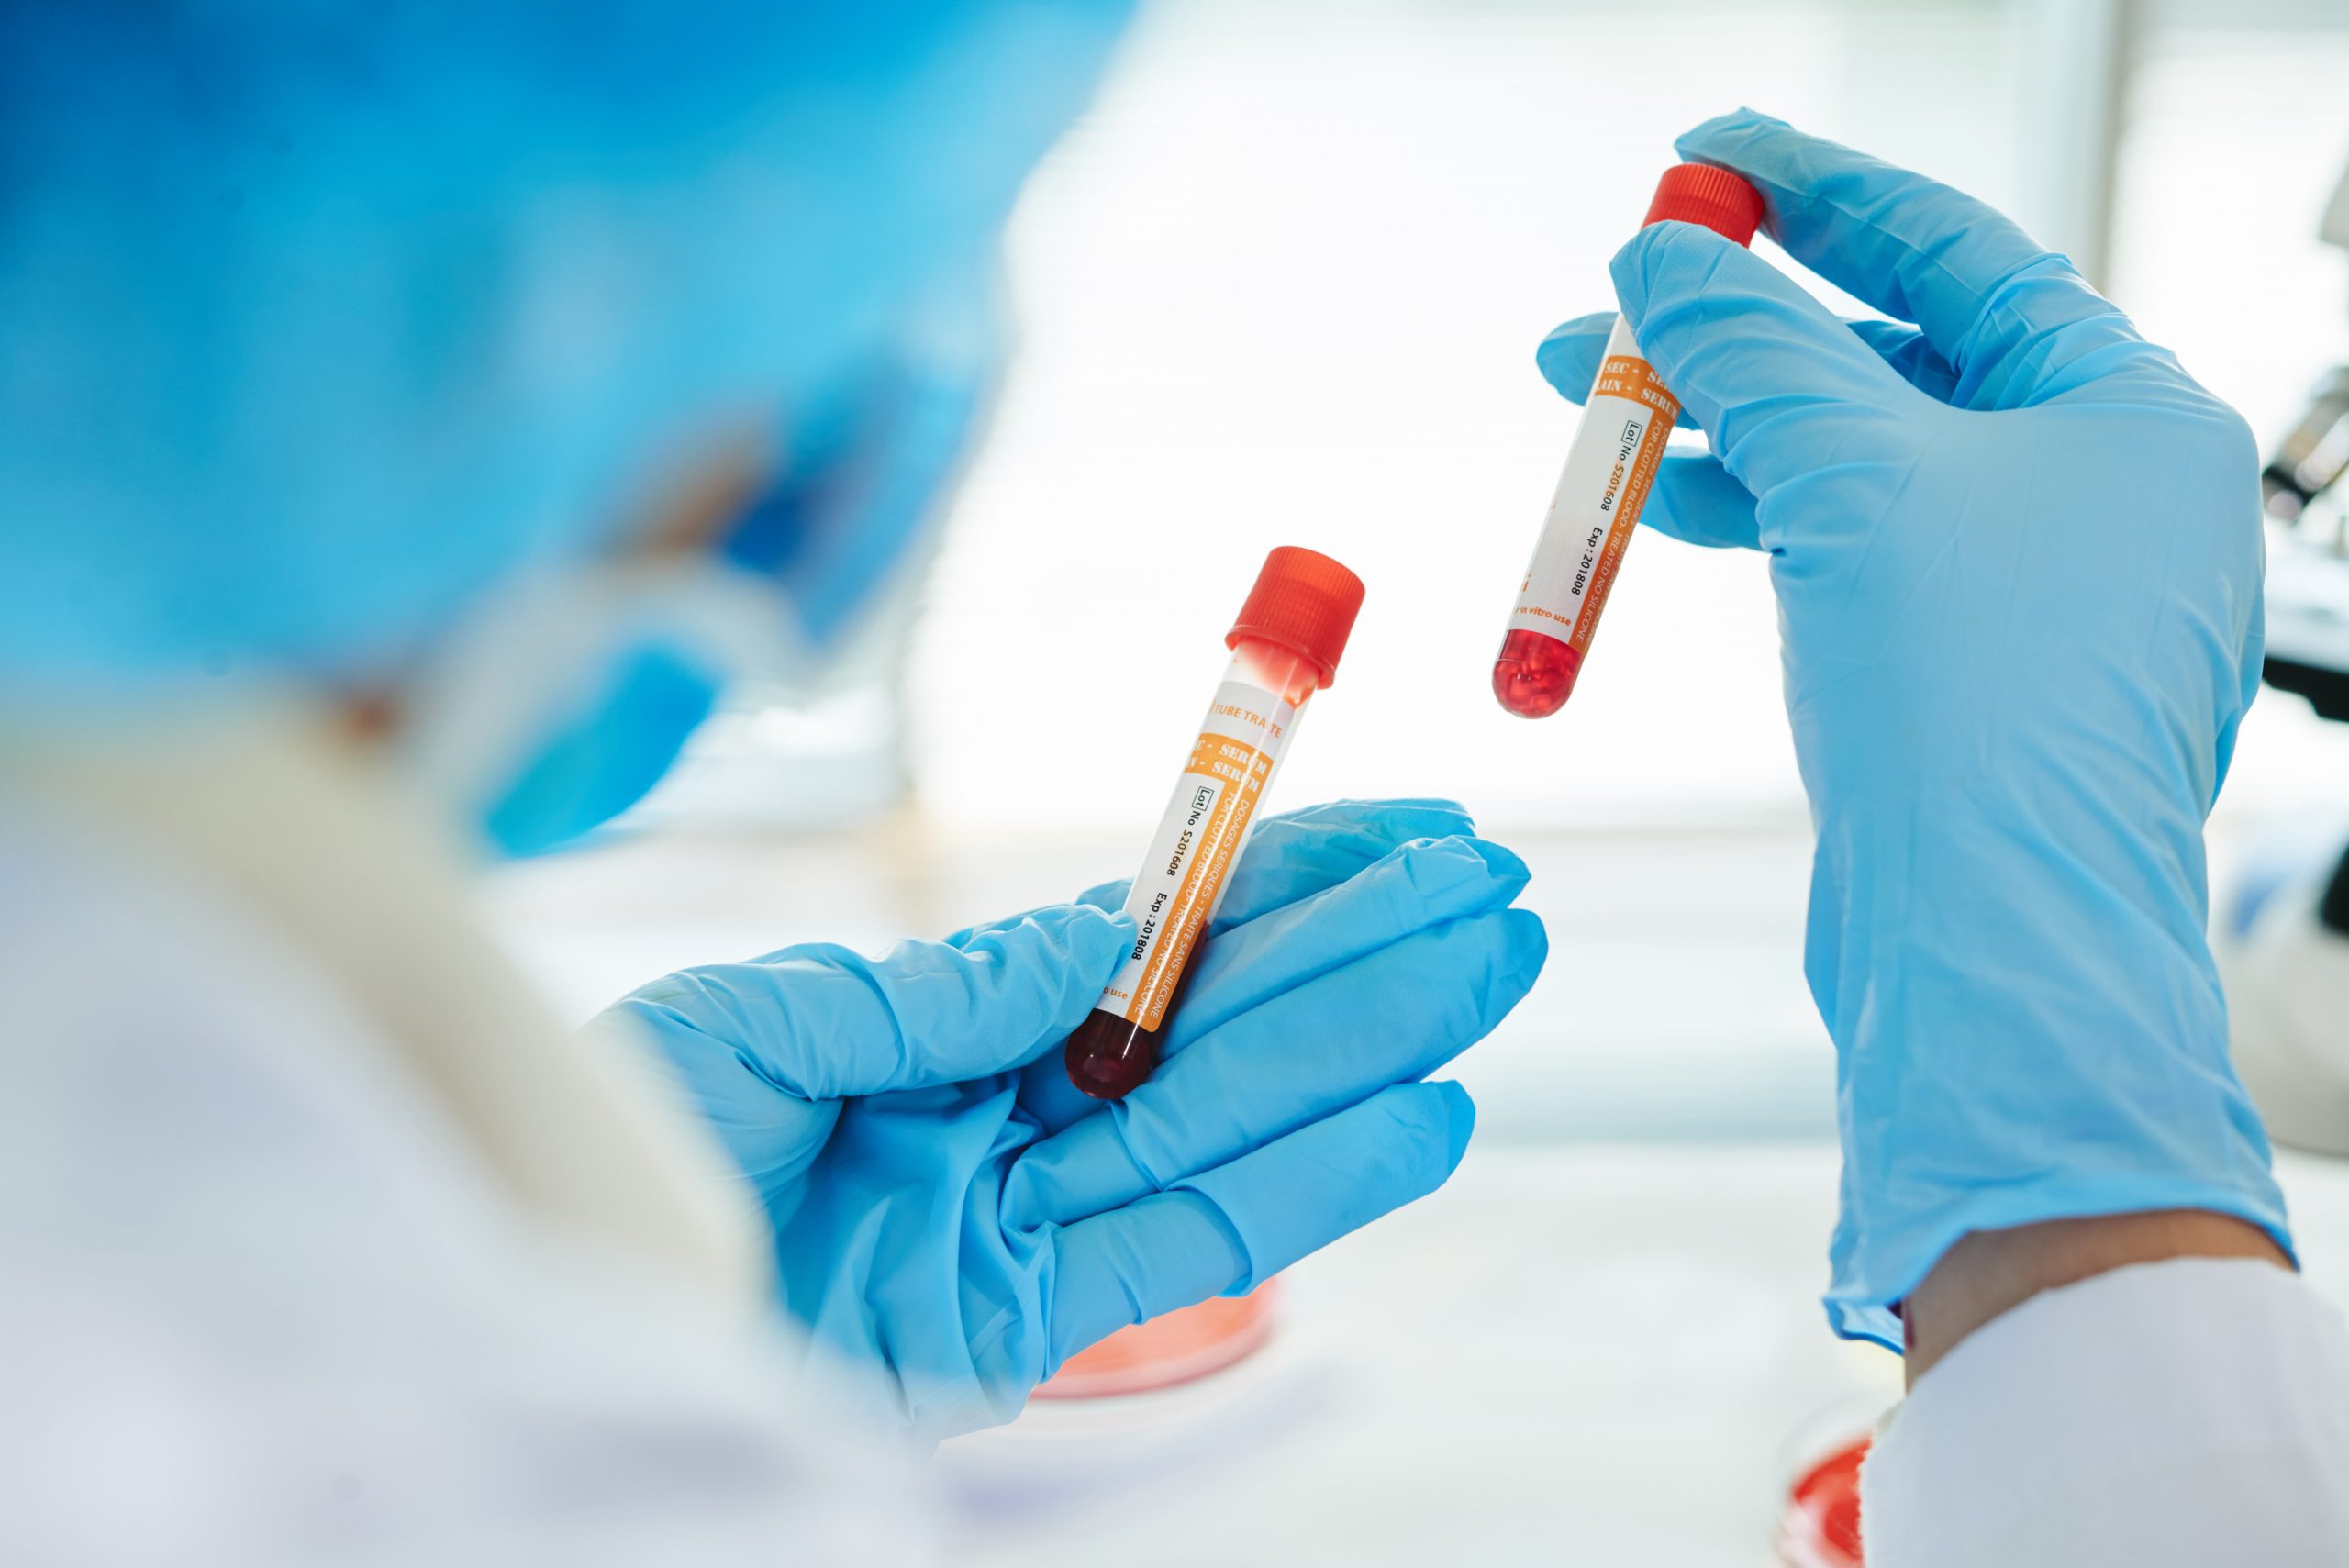 Close-up shot of unrecognizable doctor wearing rubber gloves and white coat holding blood test tubes in hands while wrapped up in work at modern lab